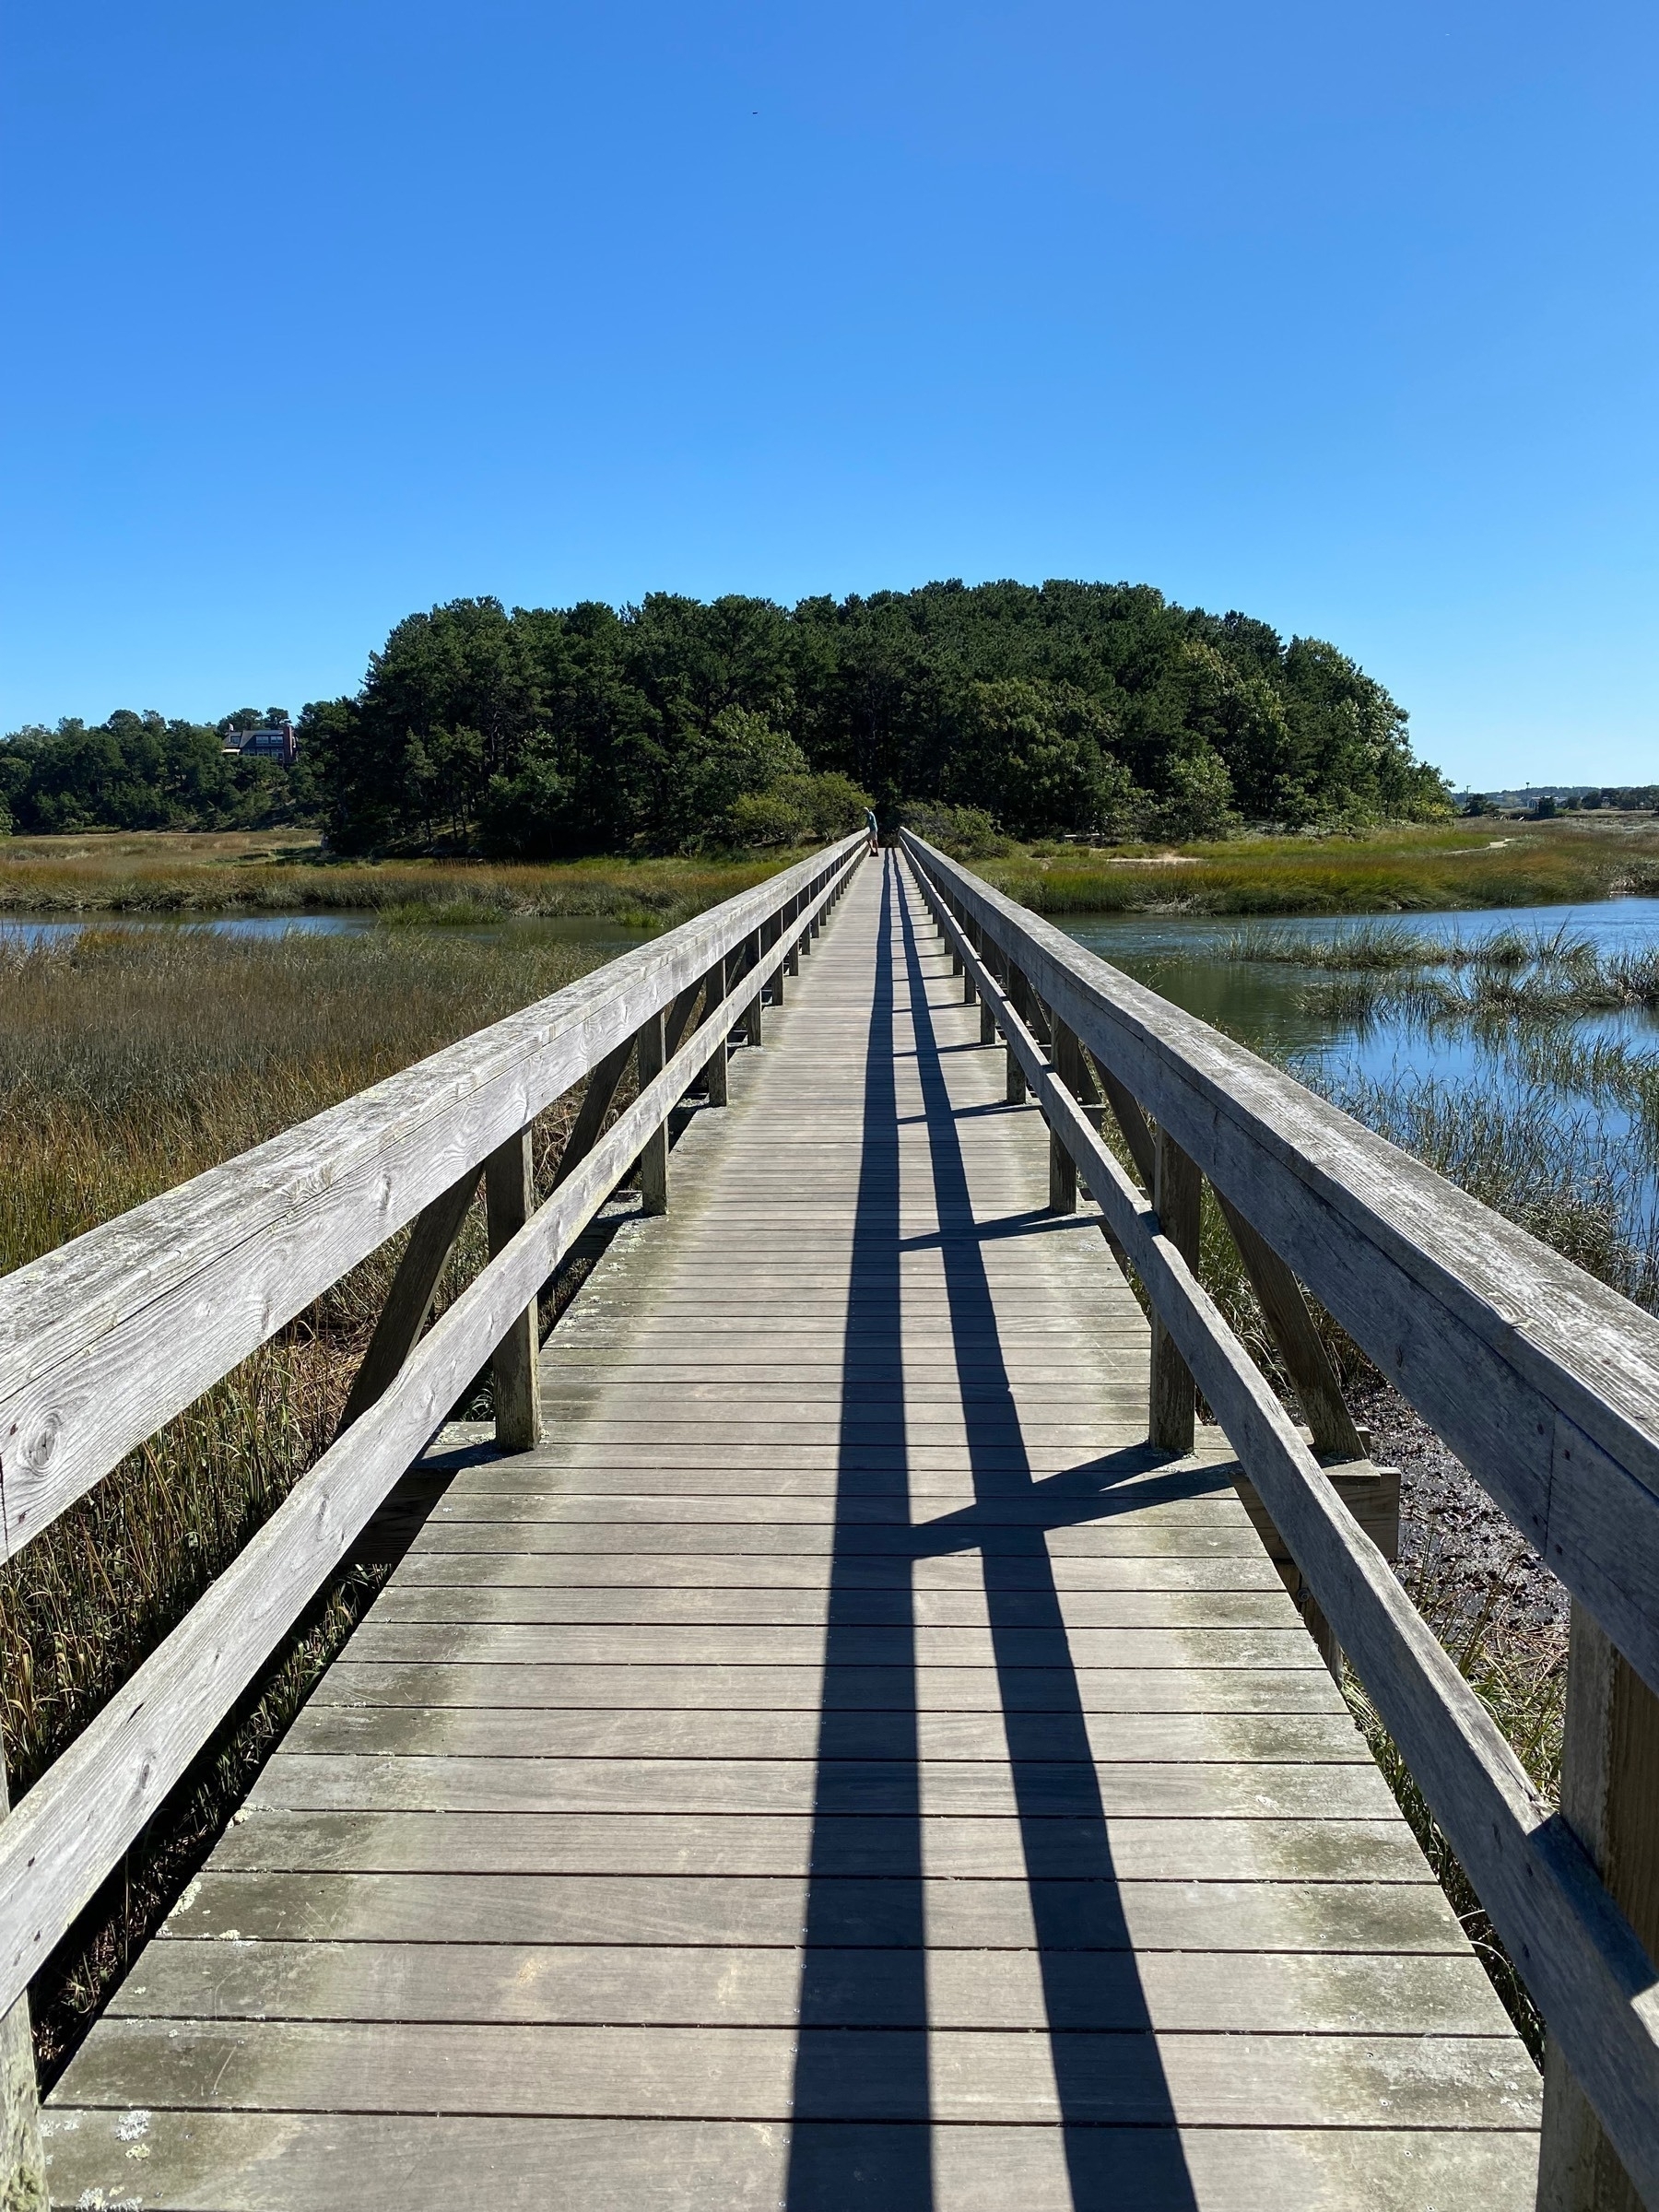 Afternoon view along a wooden bridge across a salt marsh creek, with a wooded islet at the far end.